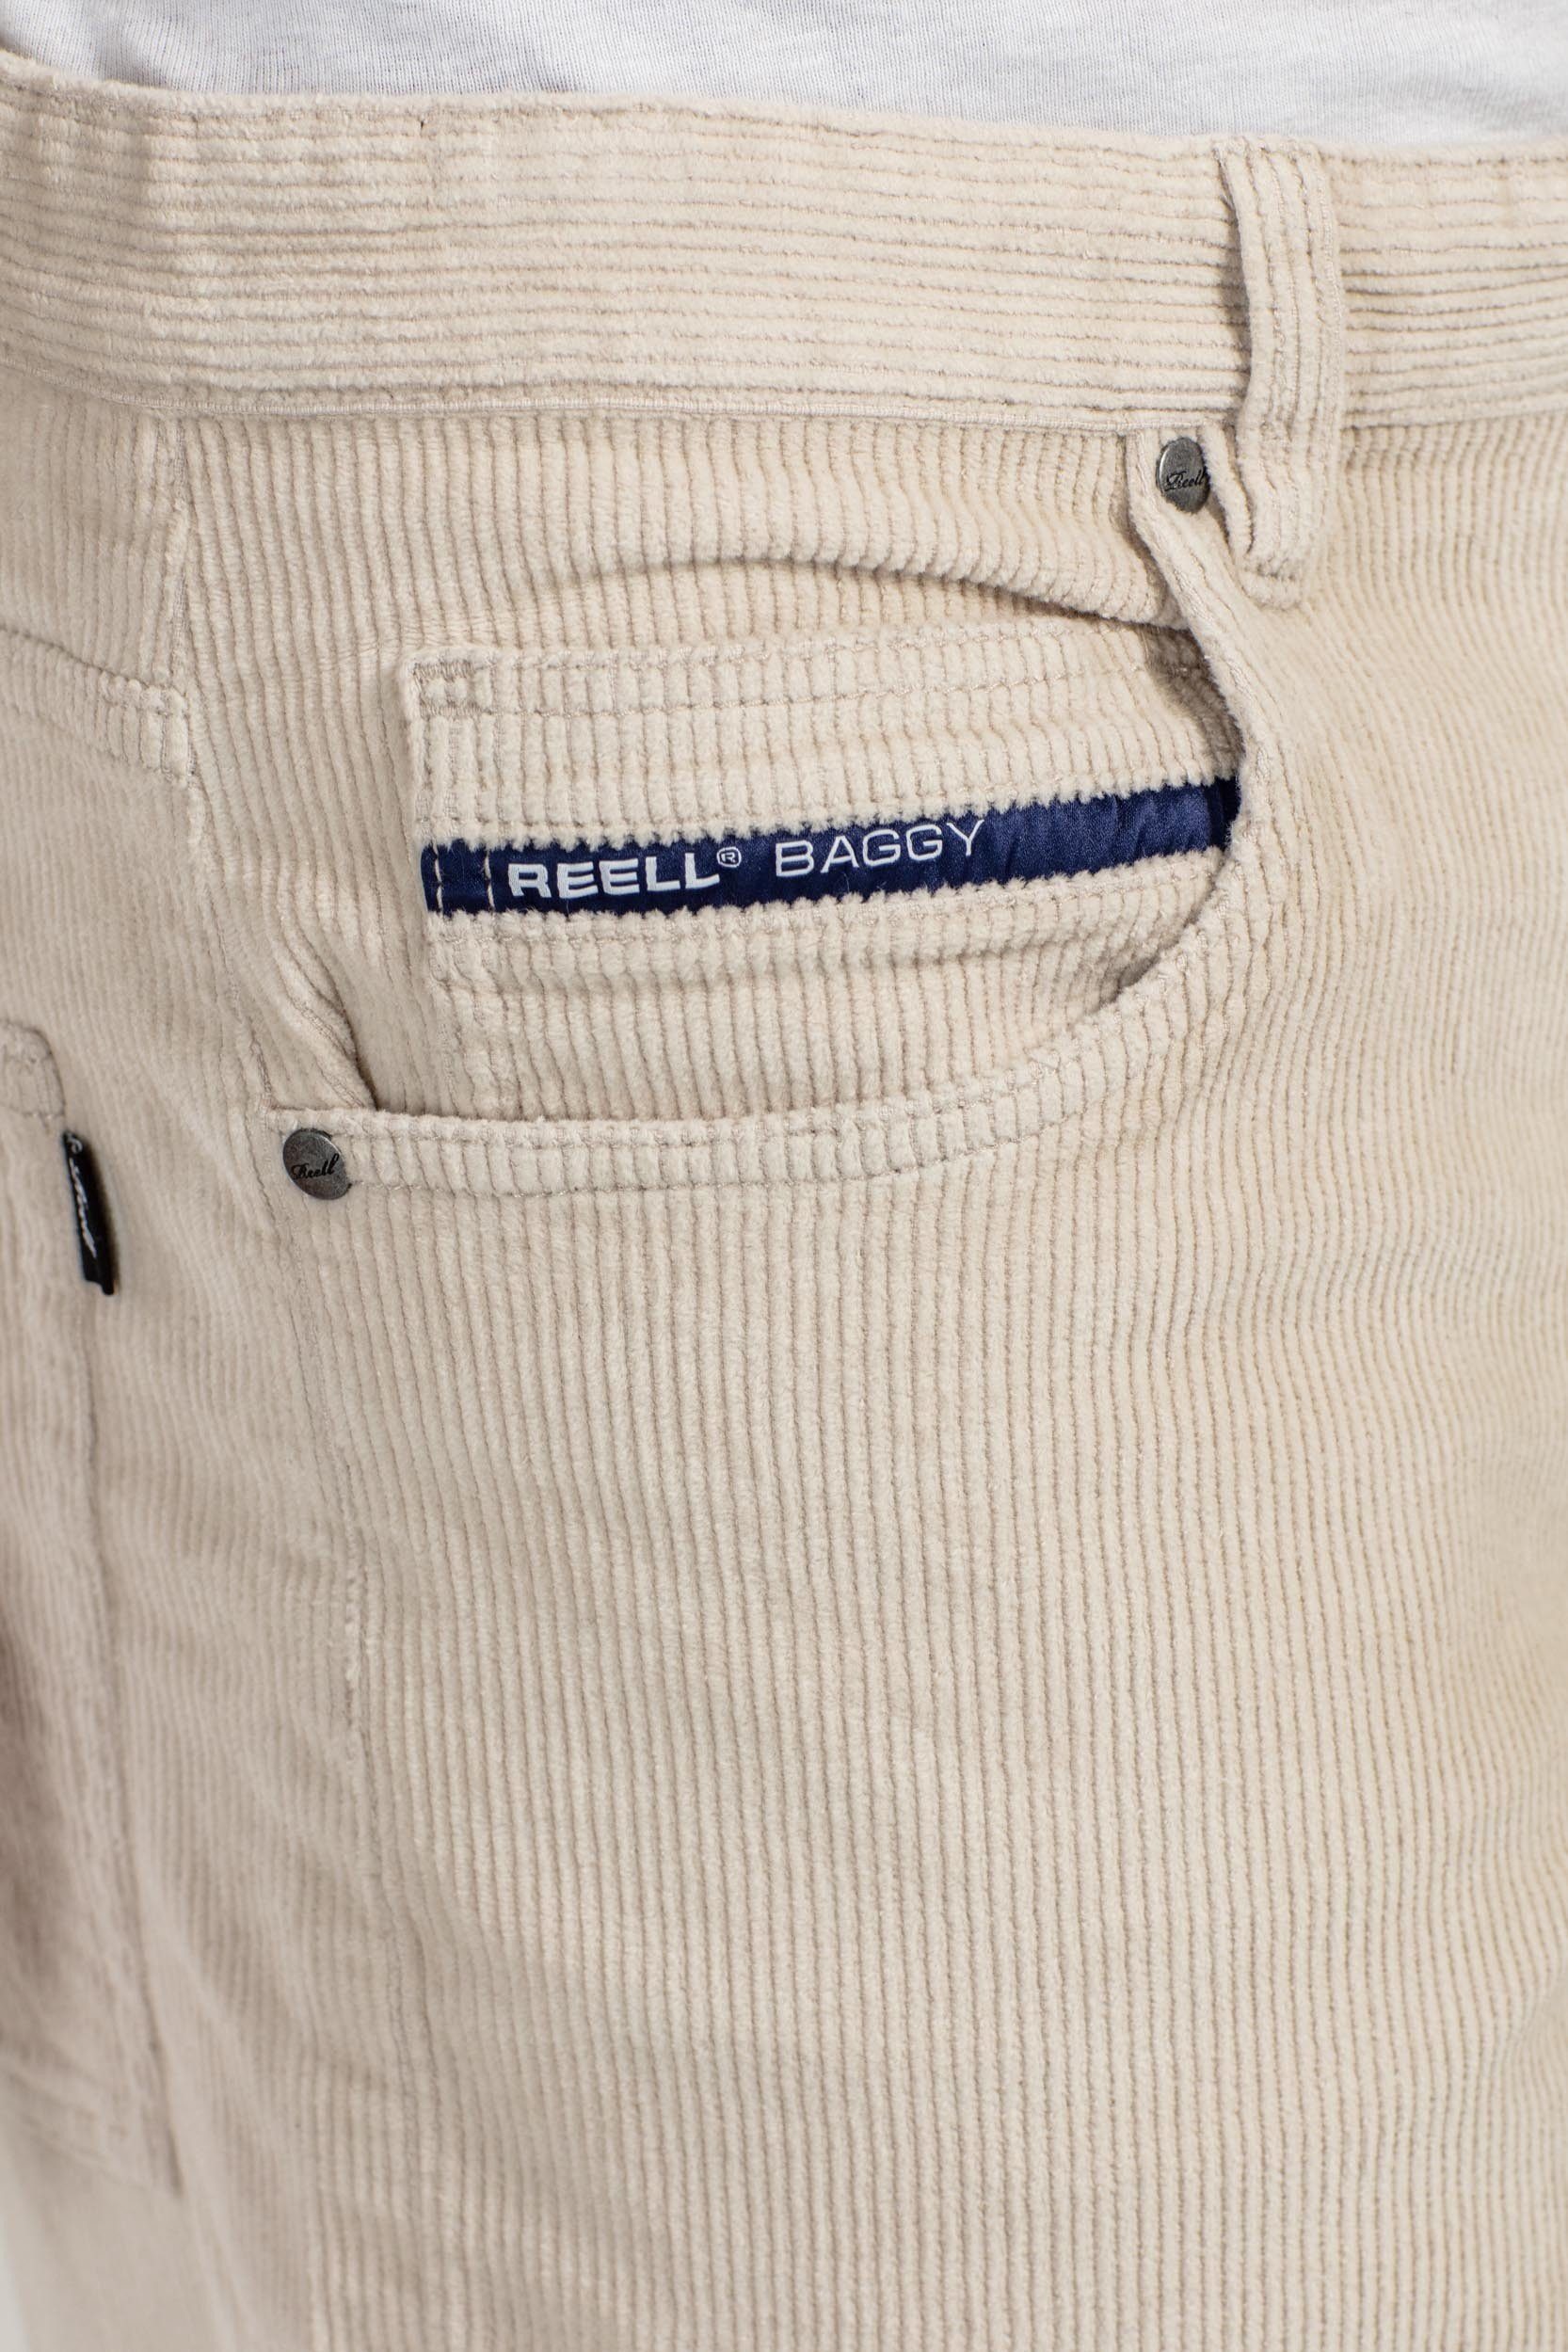 Reell Cordhose Baggy REELL Cord Hose